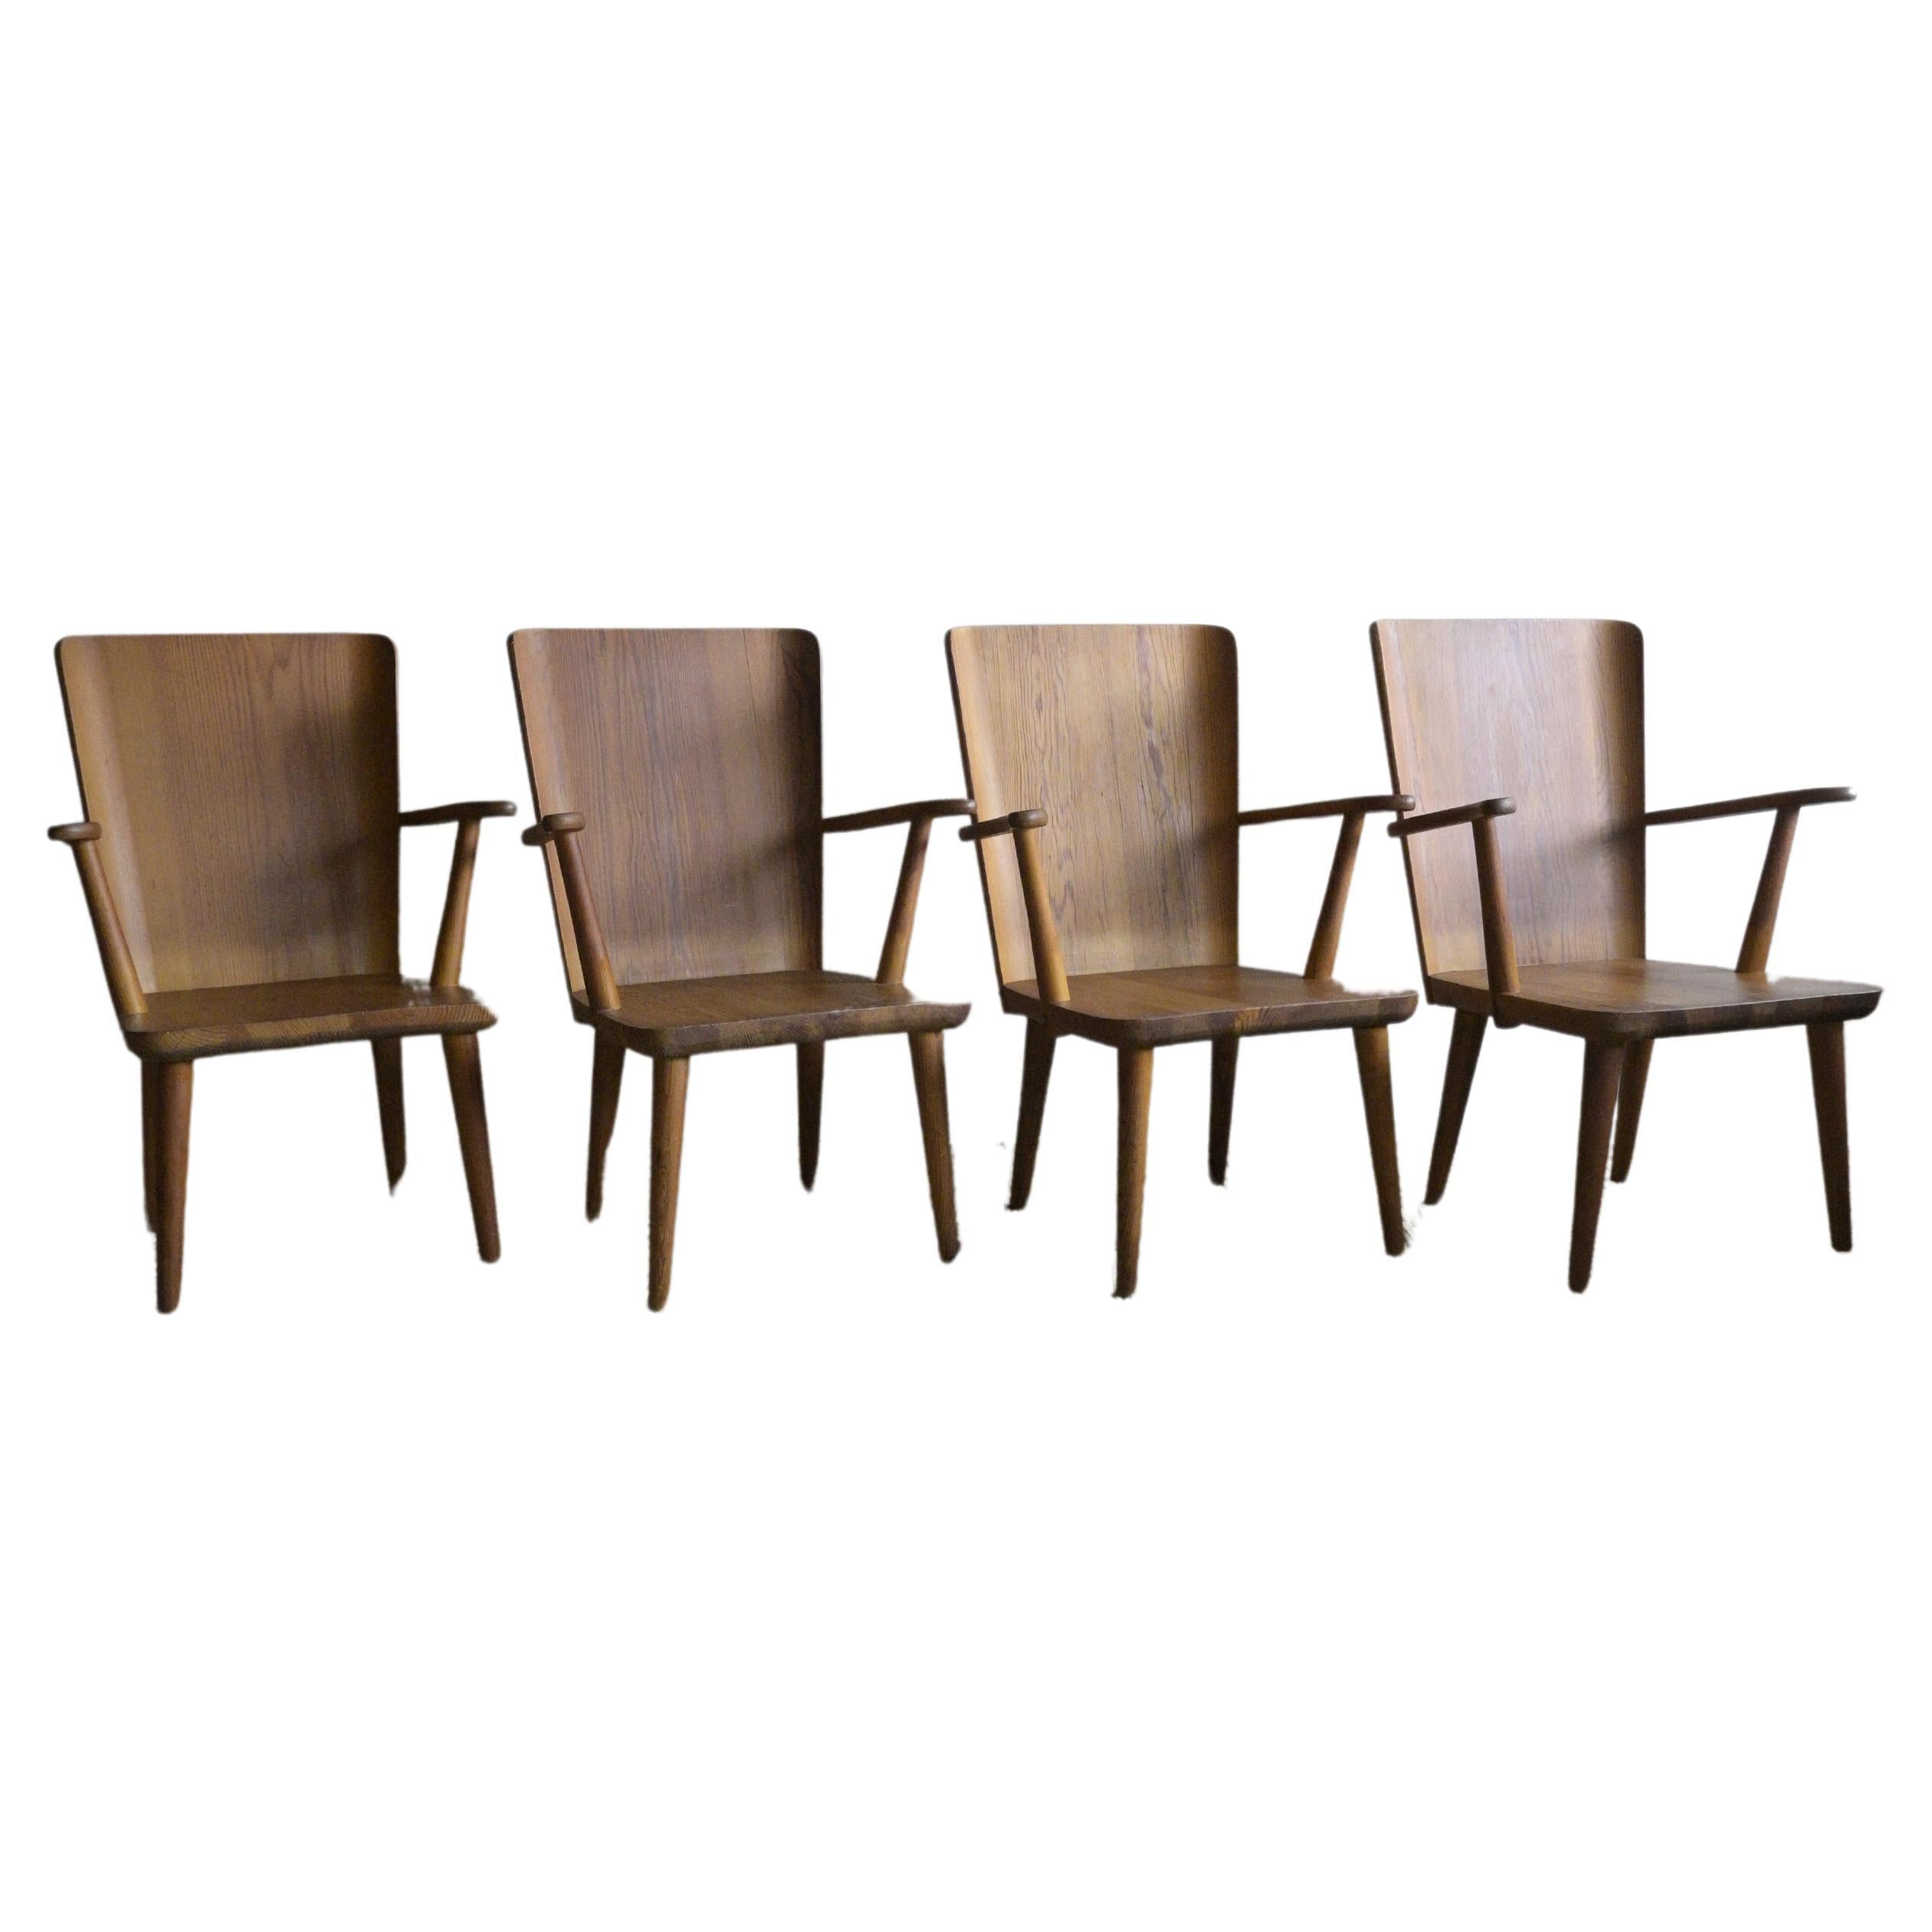 A set of four mid-century armchairs by Göran Malmvall, Svensk Furu, 1940s For Sale